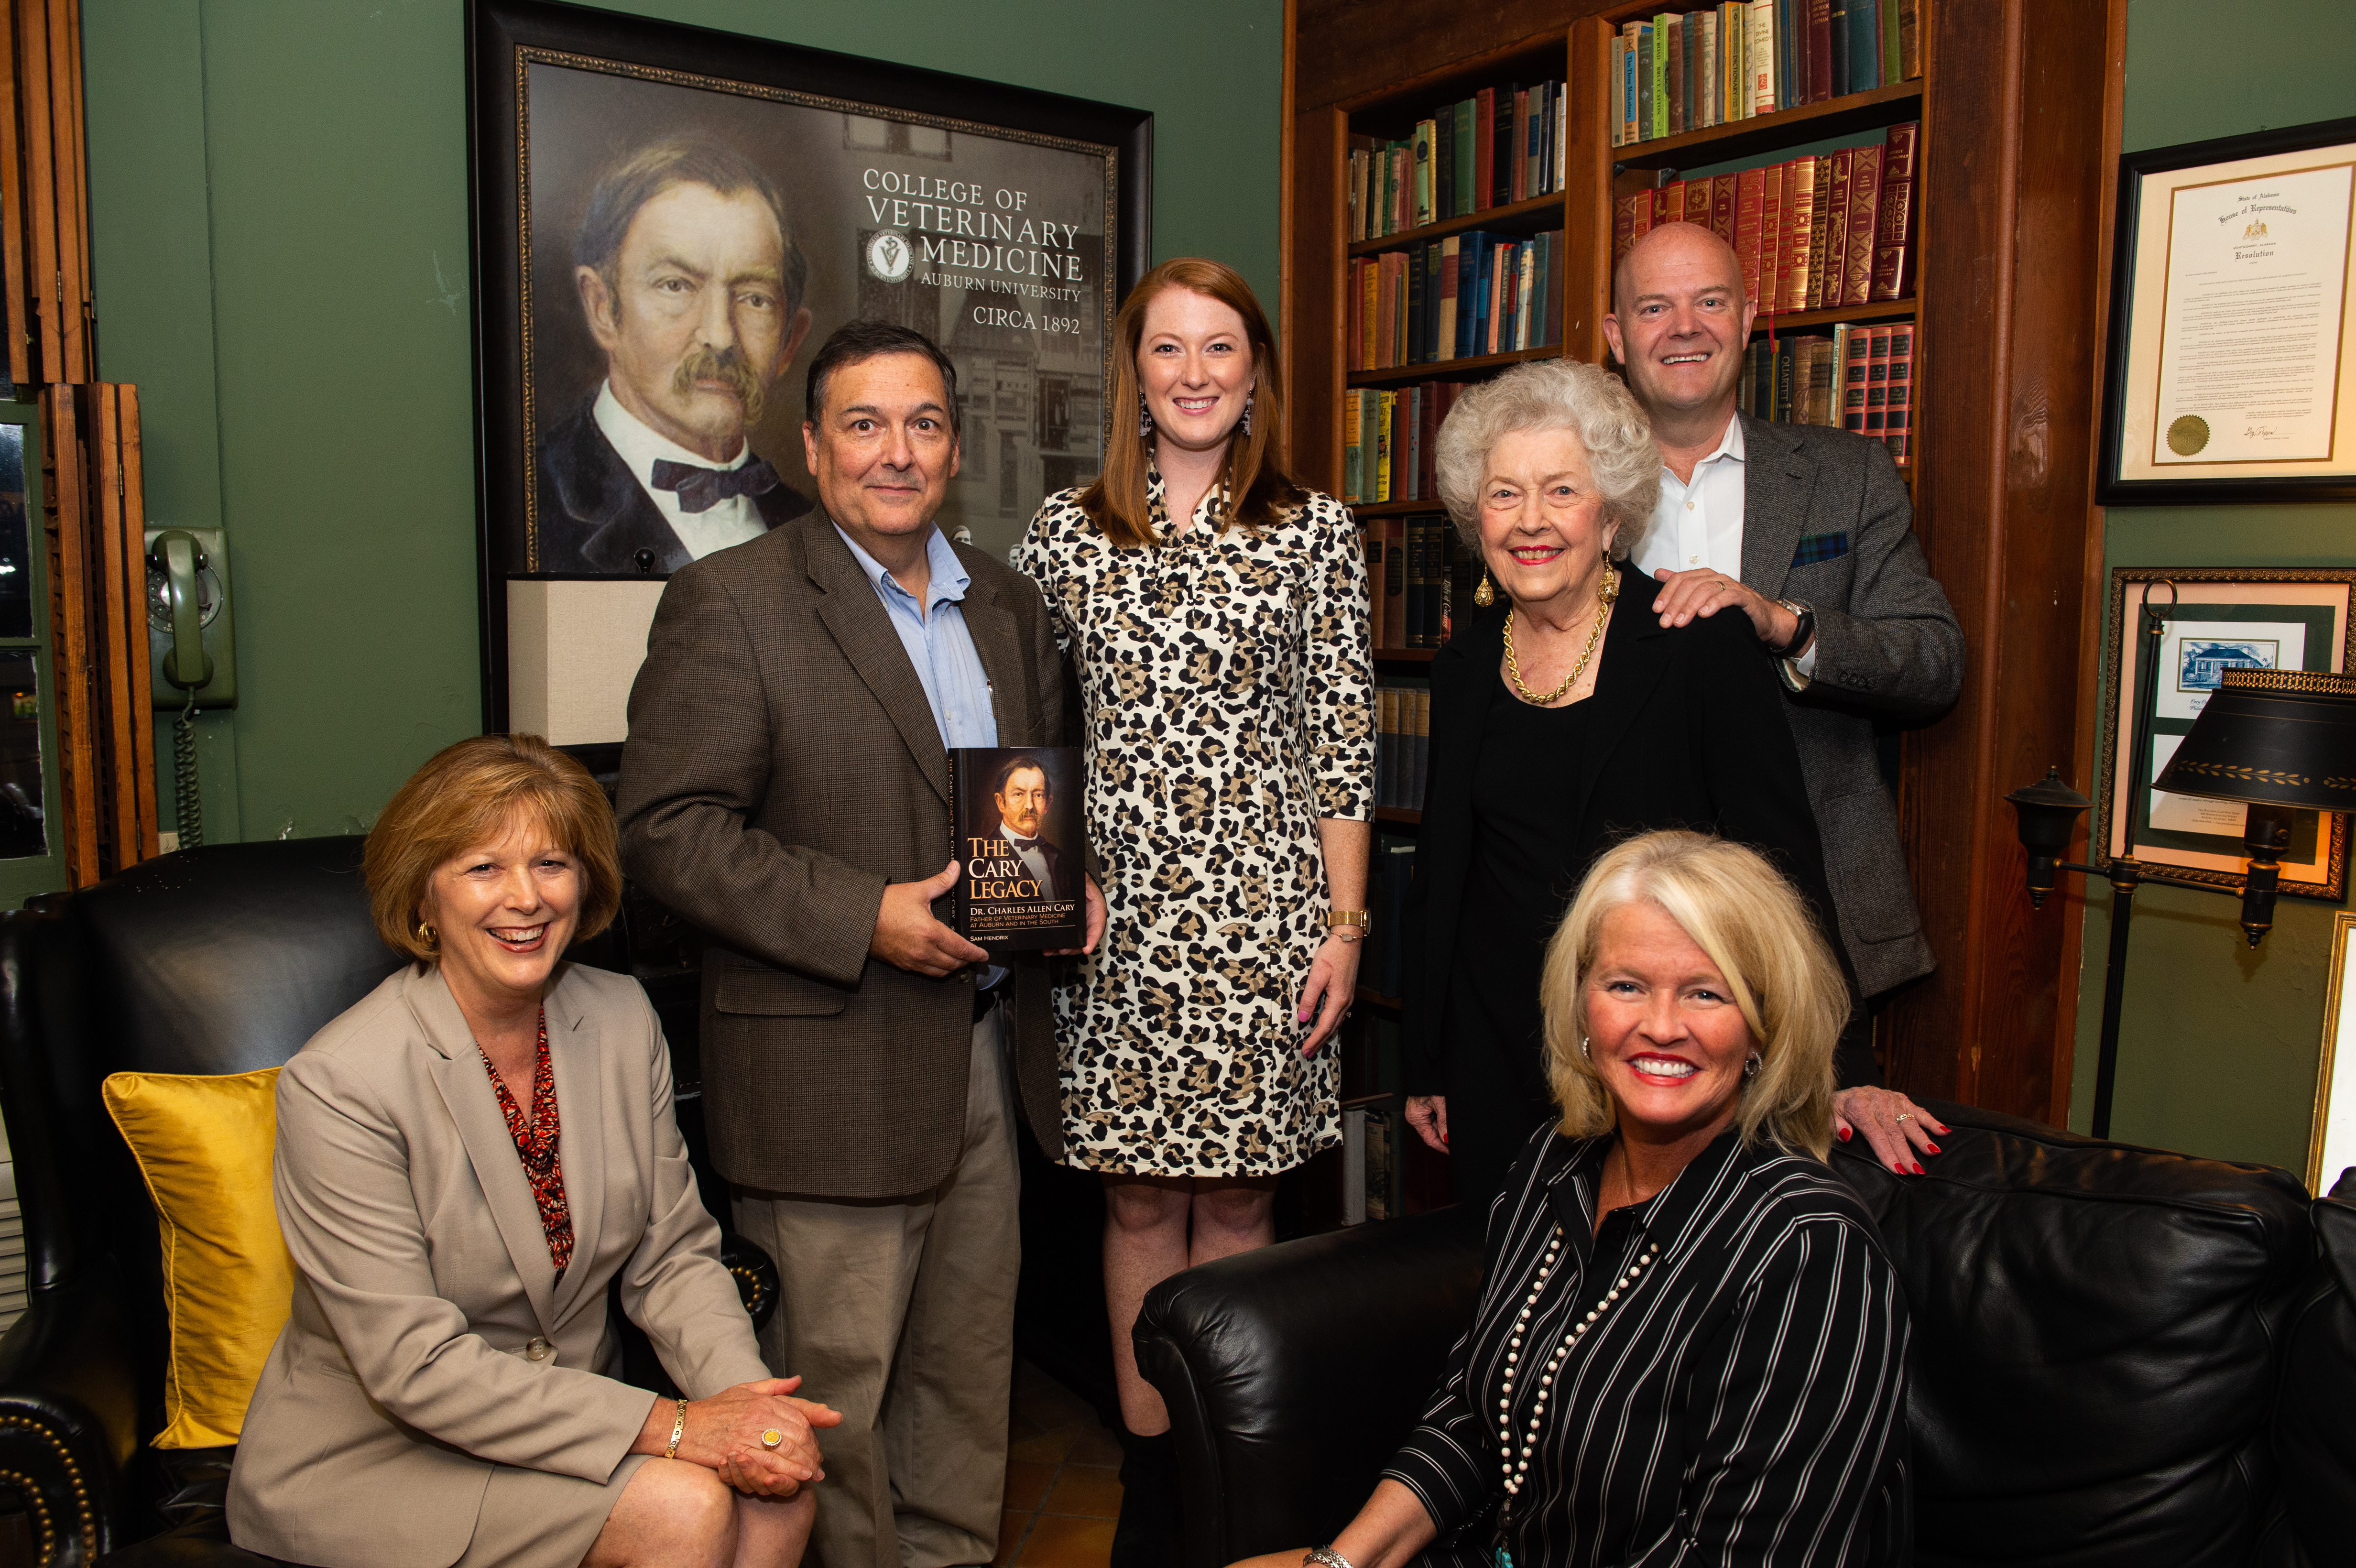 Hendrix, second from the left, with Cary family descendants, including Dr. Cary Frances Clark, third from left, a 2015 graduate of the college.